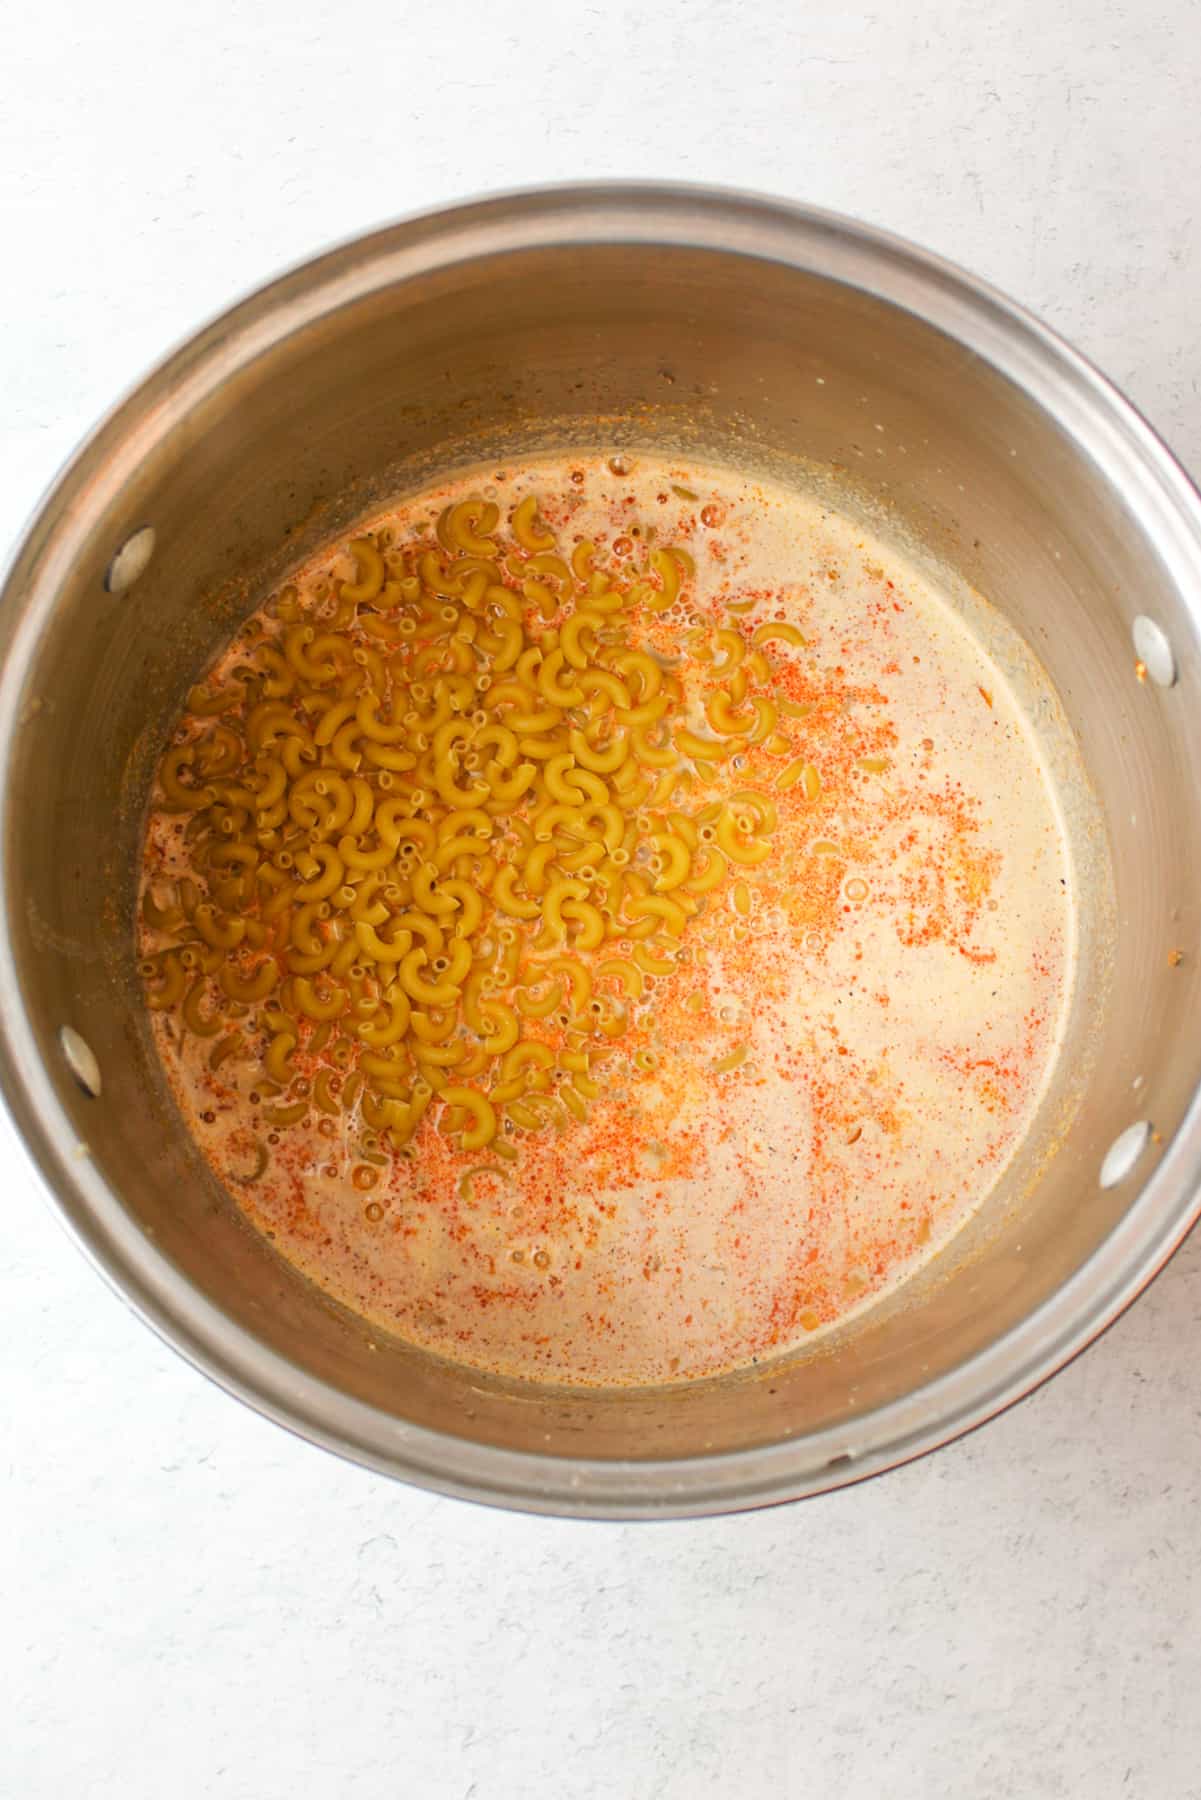 dry elbow noodles added to a large pot of orange liquid